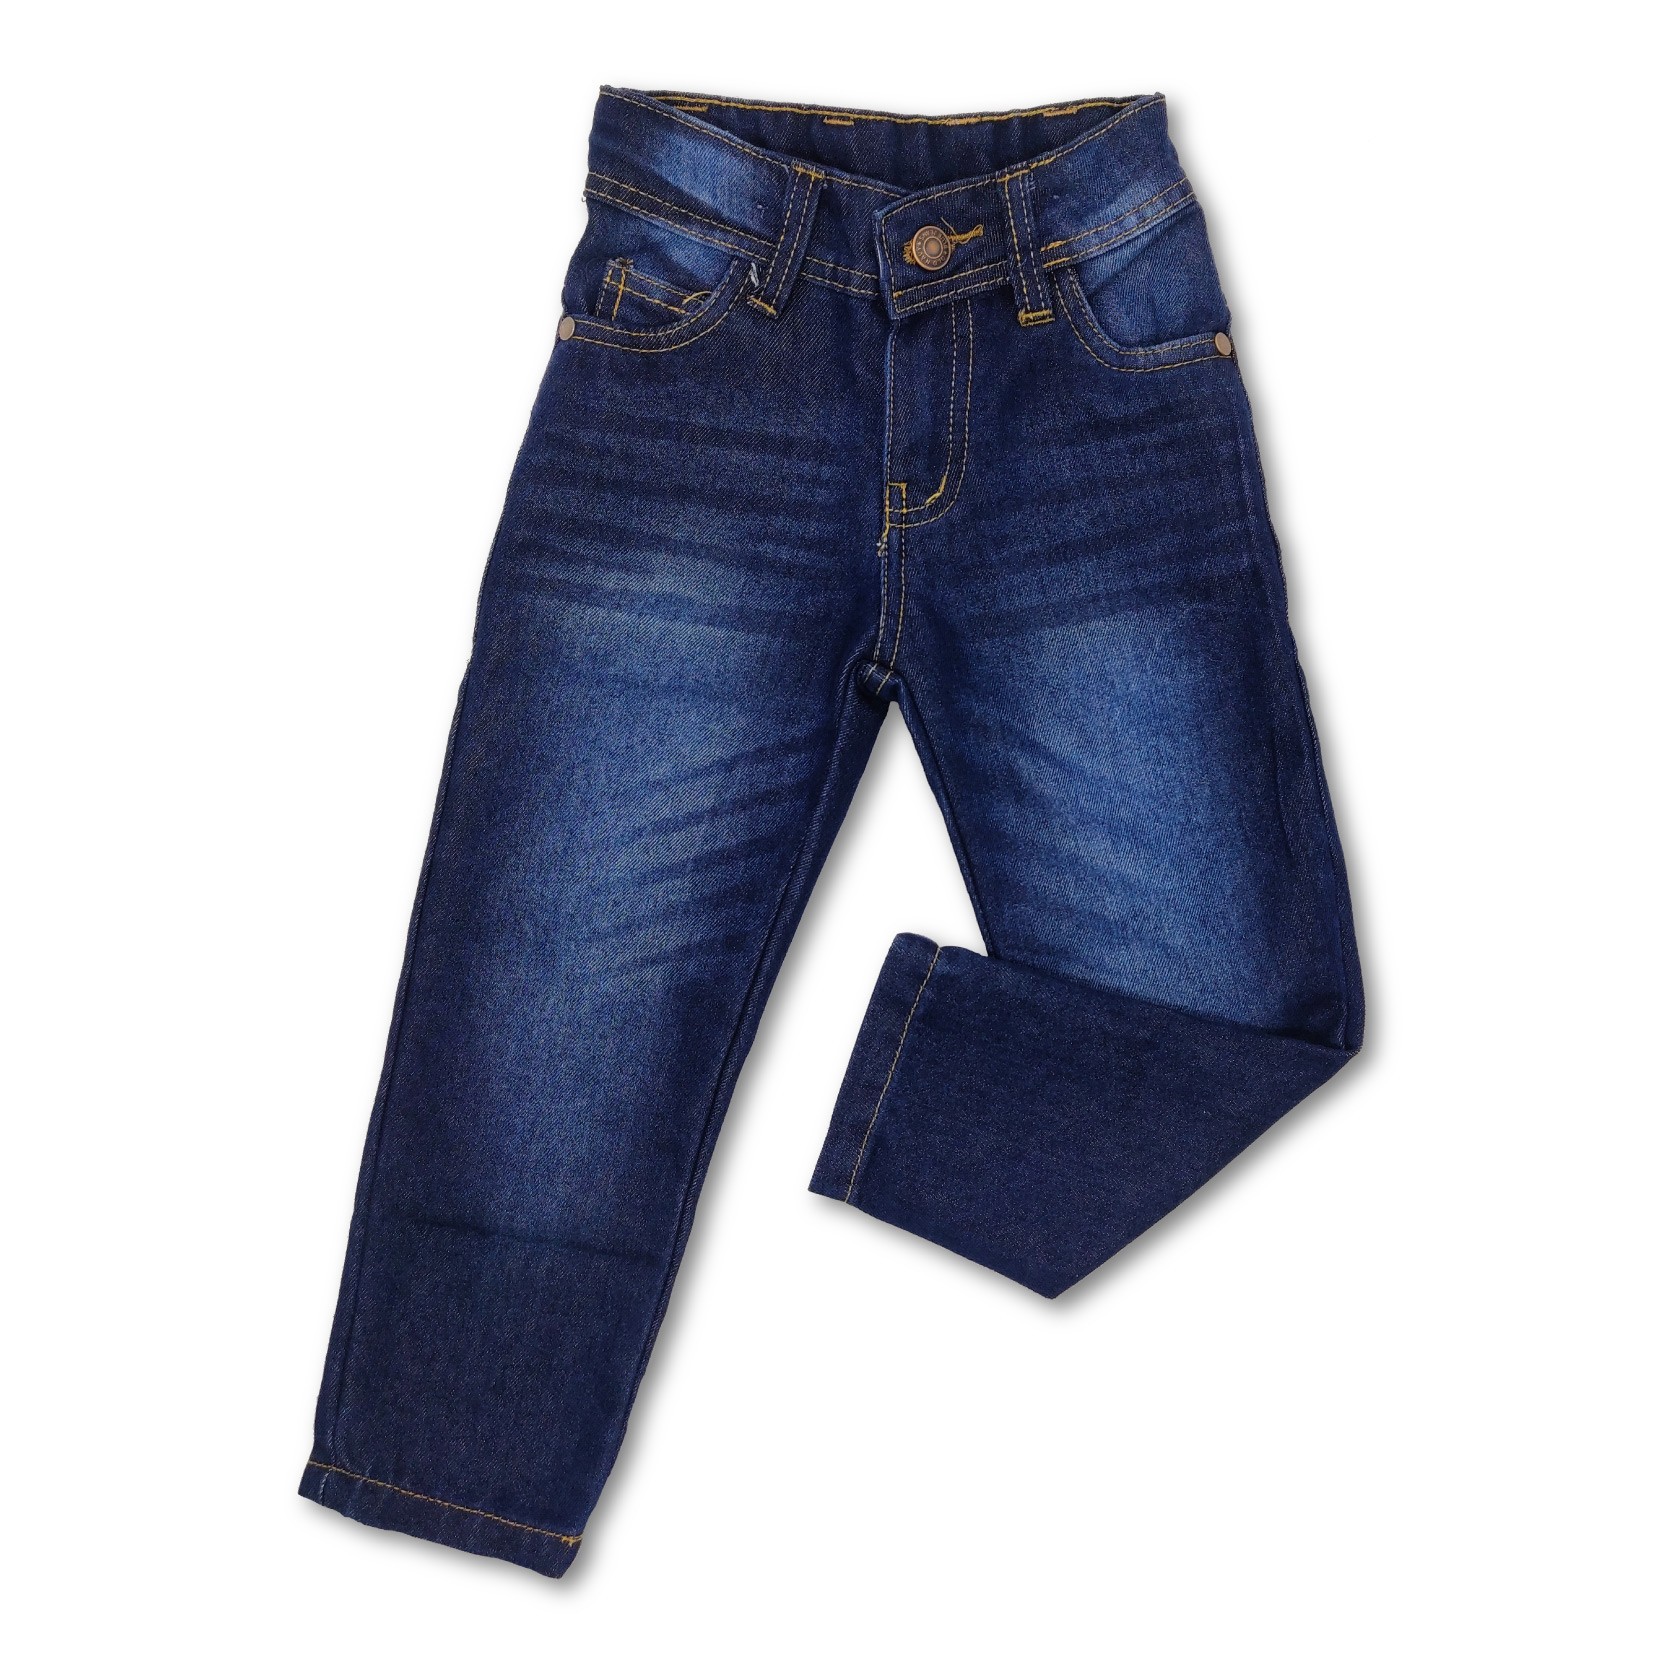 Boys Jeans in Delhi at best price by Paridhi Trading Company - Justdial